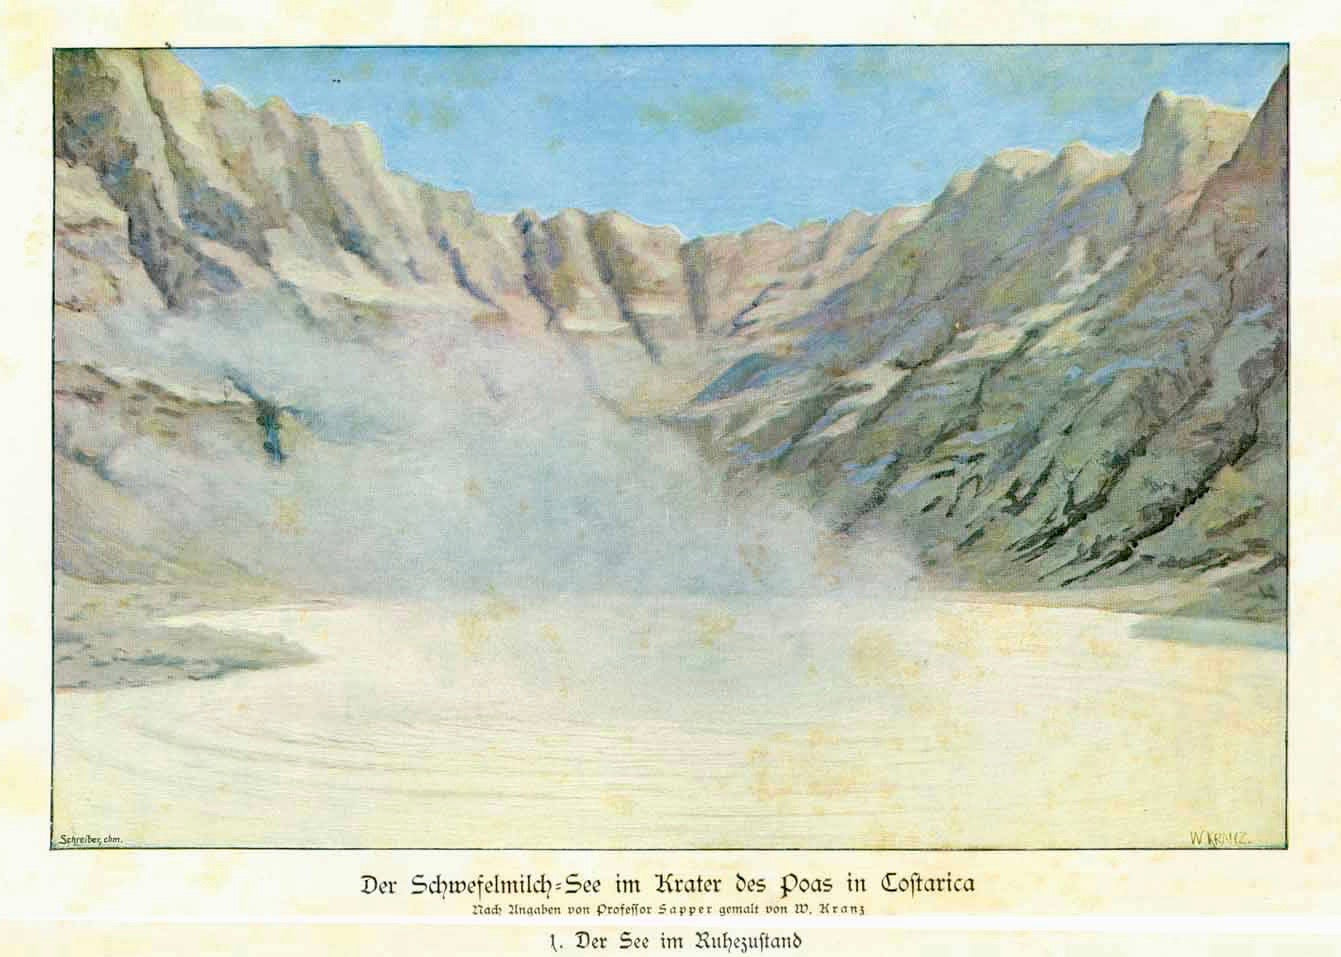 Upper image: "Der Schwefel See im Krater des Poas in Costarica" (the sulfer lake in the crater of Poas in Costa Rica)  Middle image: "Die Schlamm Eruption in der Mitte des Schwelfelmilch Sees" (the eruption of mud in the sulfer lake)  Lower image: "Beendigung der Schlamm Eruption durch Explosion der angesammelten Daempfe" (end of the mud eruption by an explosion of the collected steam)